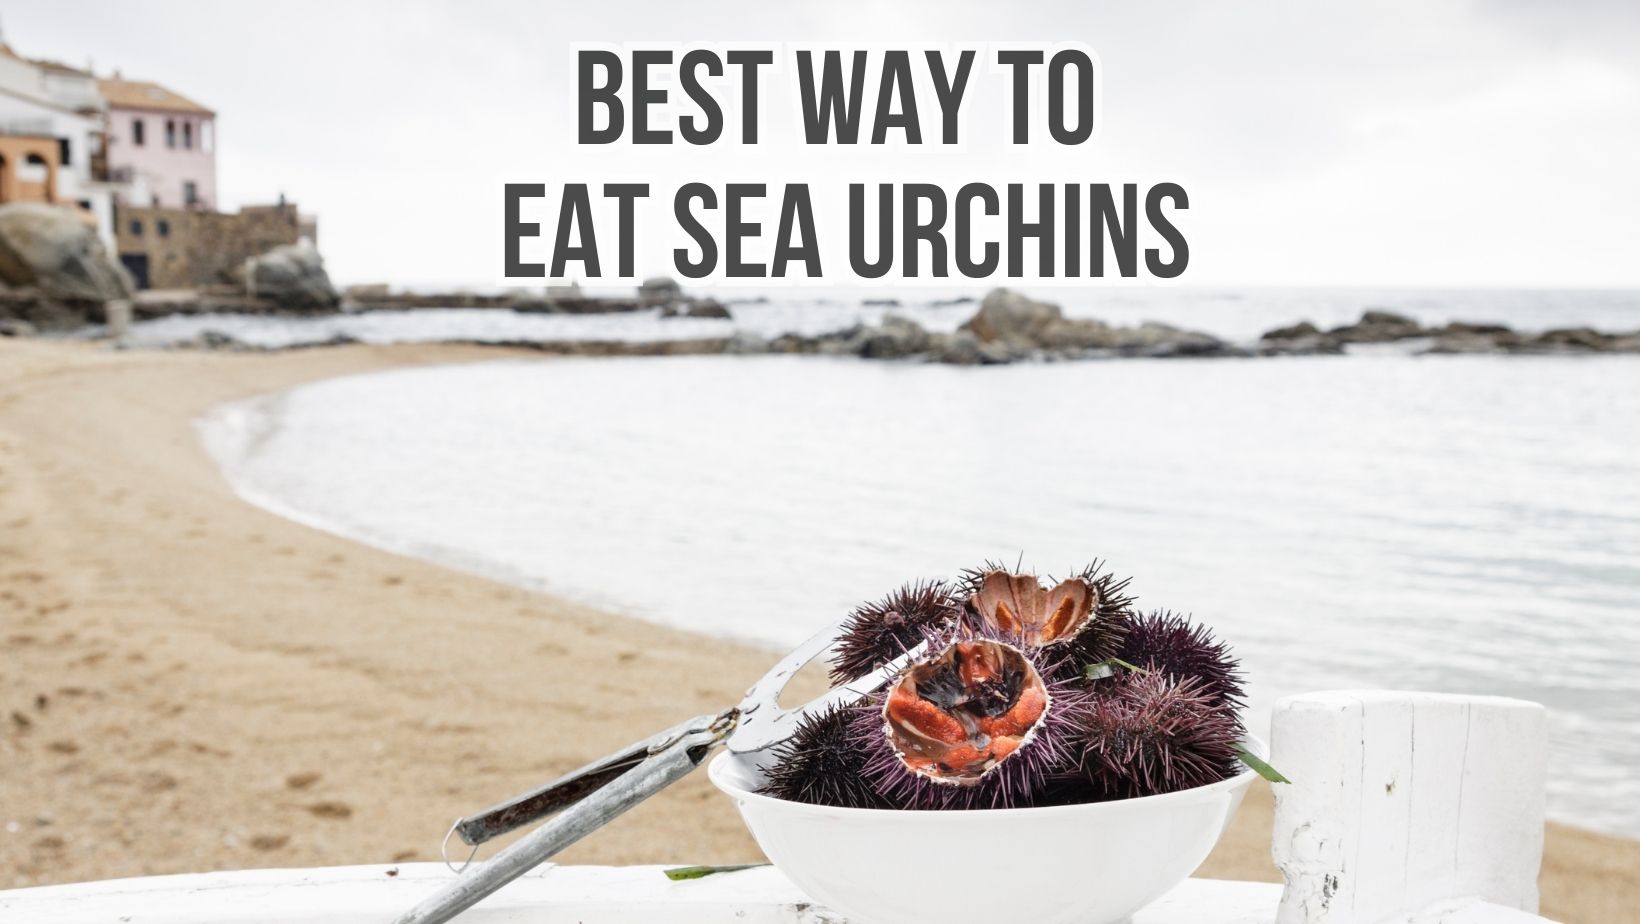 Best Way To Eat Sea Urchins